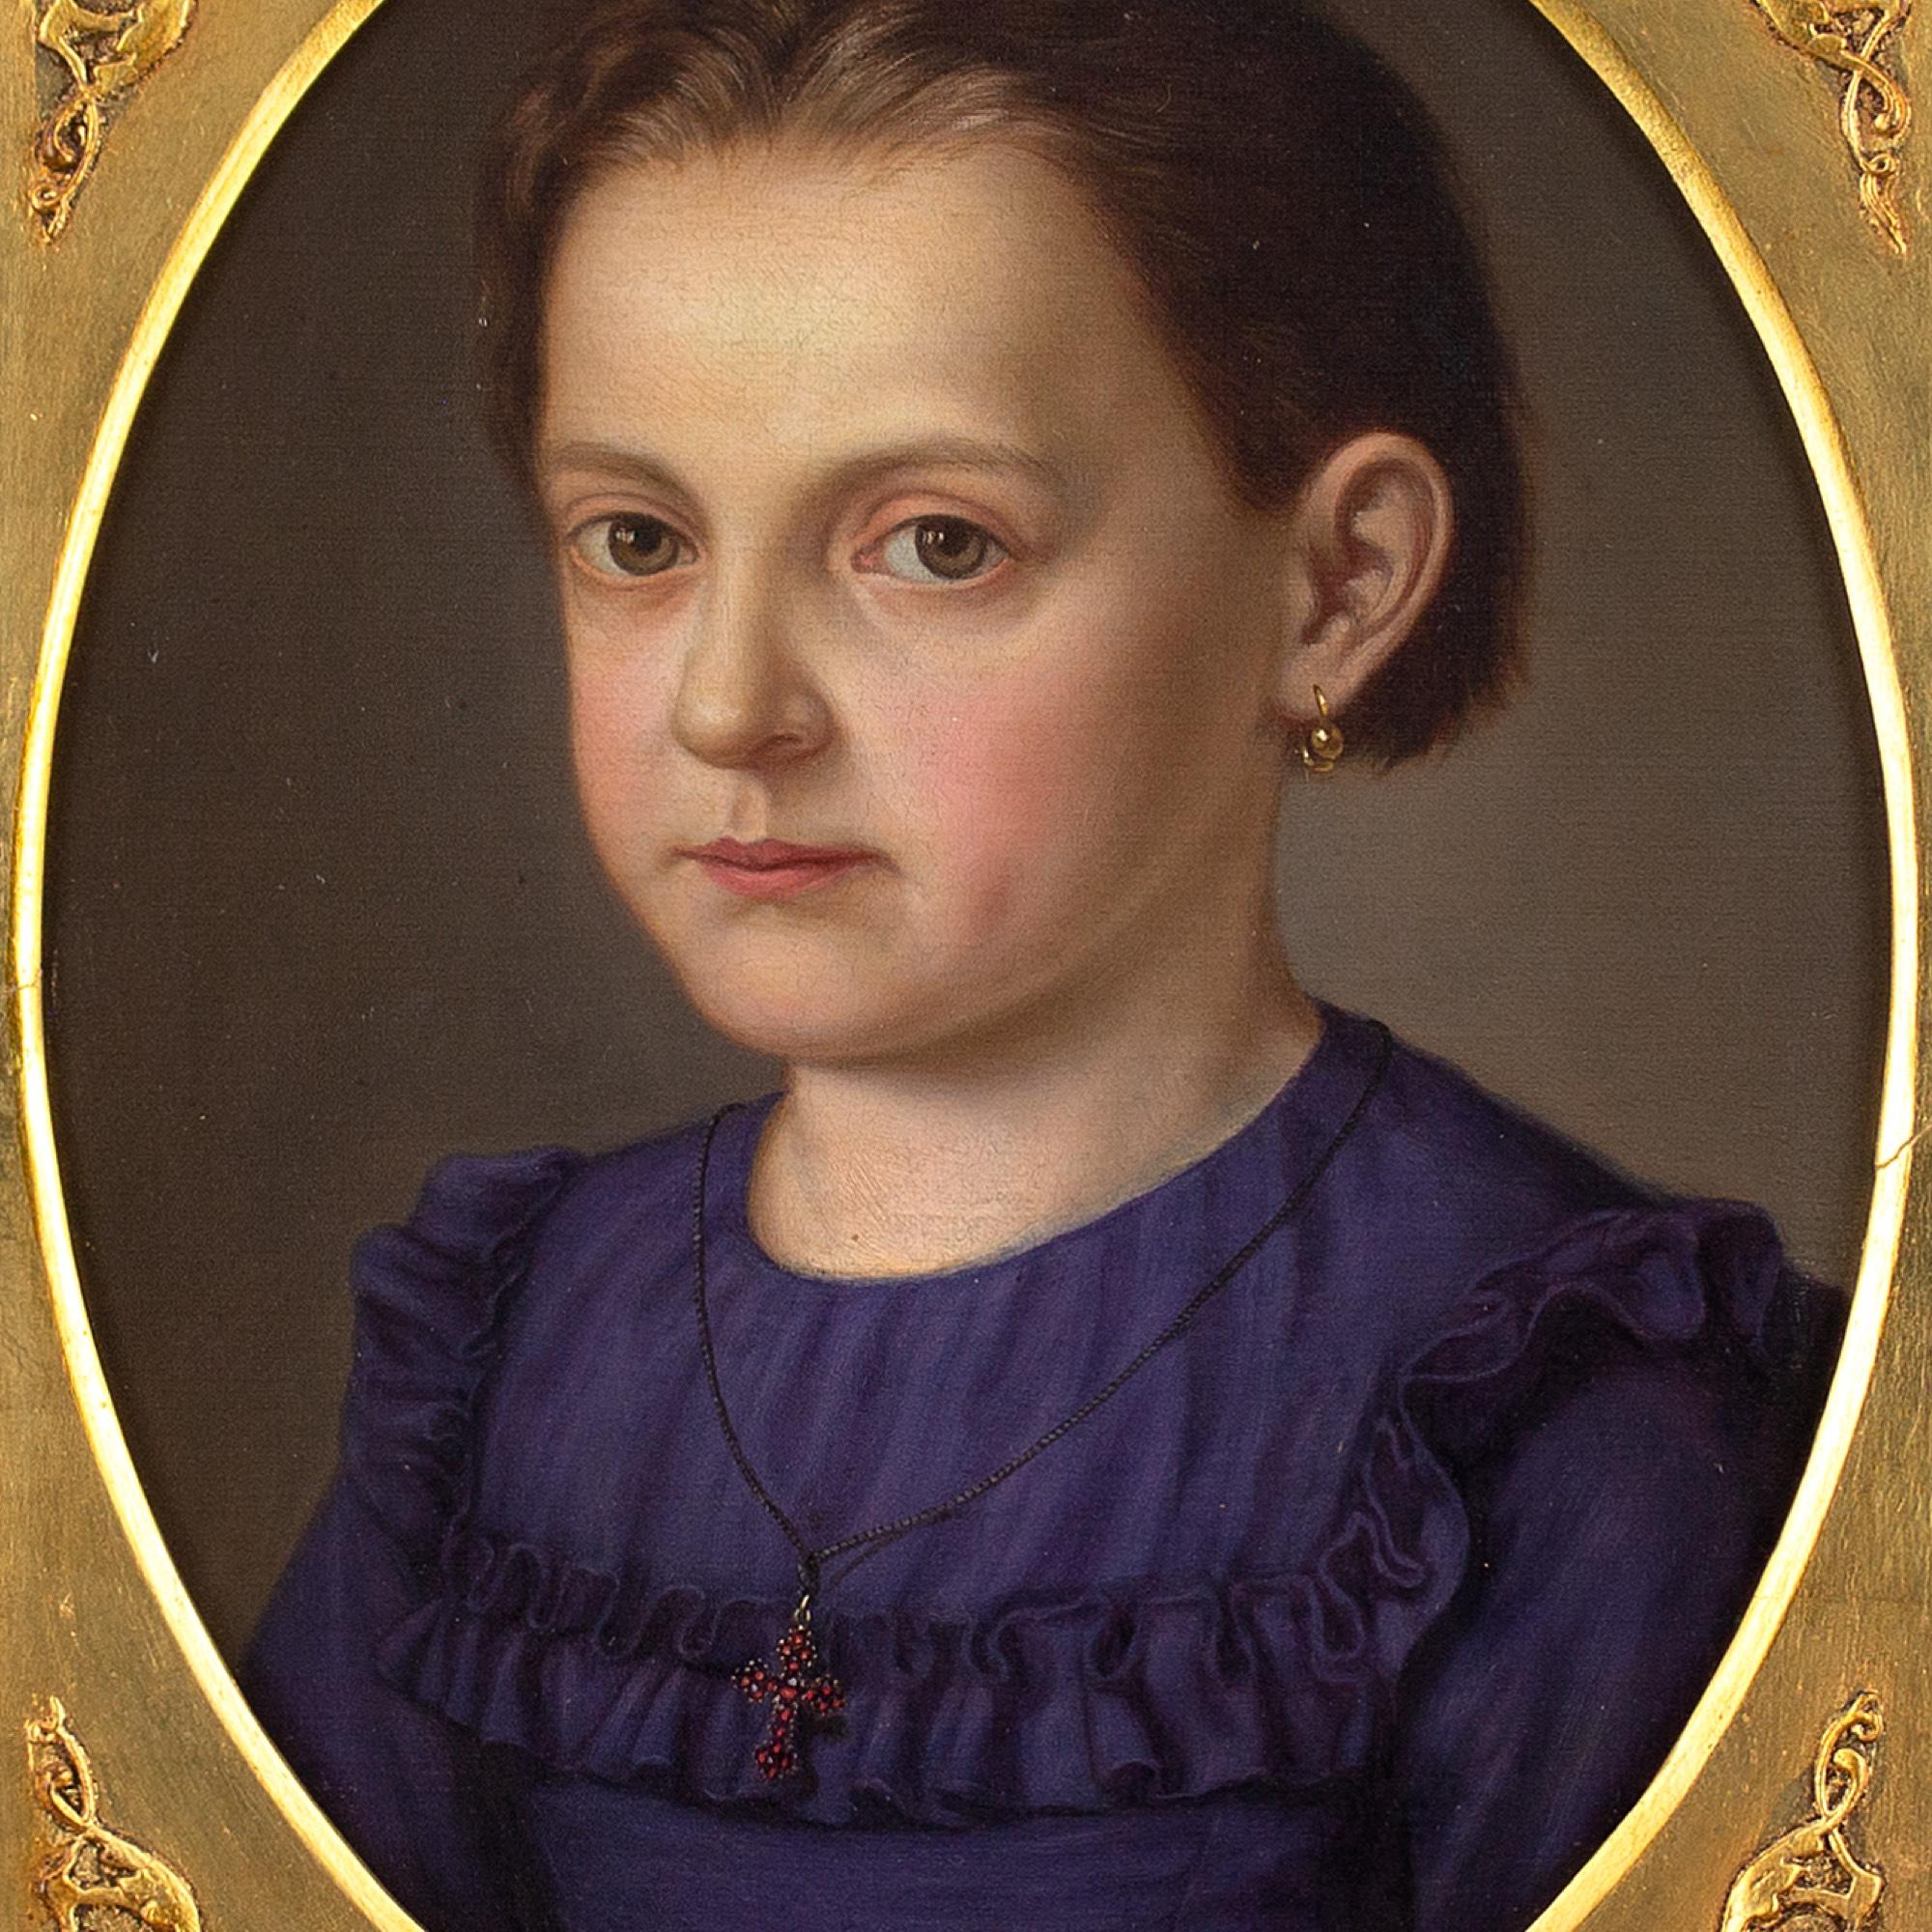 This charming late 19th-century portrait depicts a girl wearing a blue dress, gold earring and a cross pendant. It’s rendered beautifully, particularly the skin tones with their subtle gradients. Note also the dimple in the cheek.

The painting is